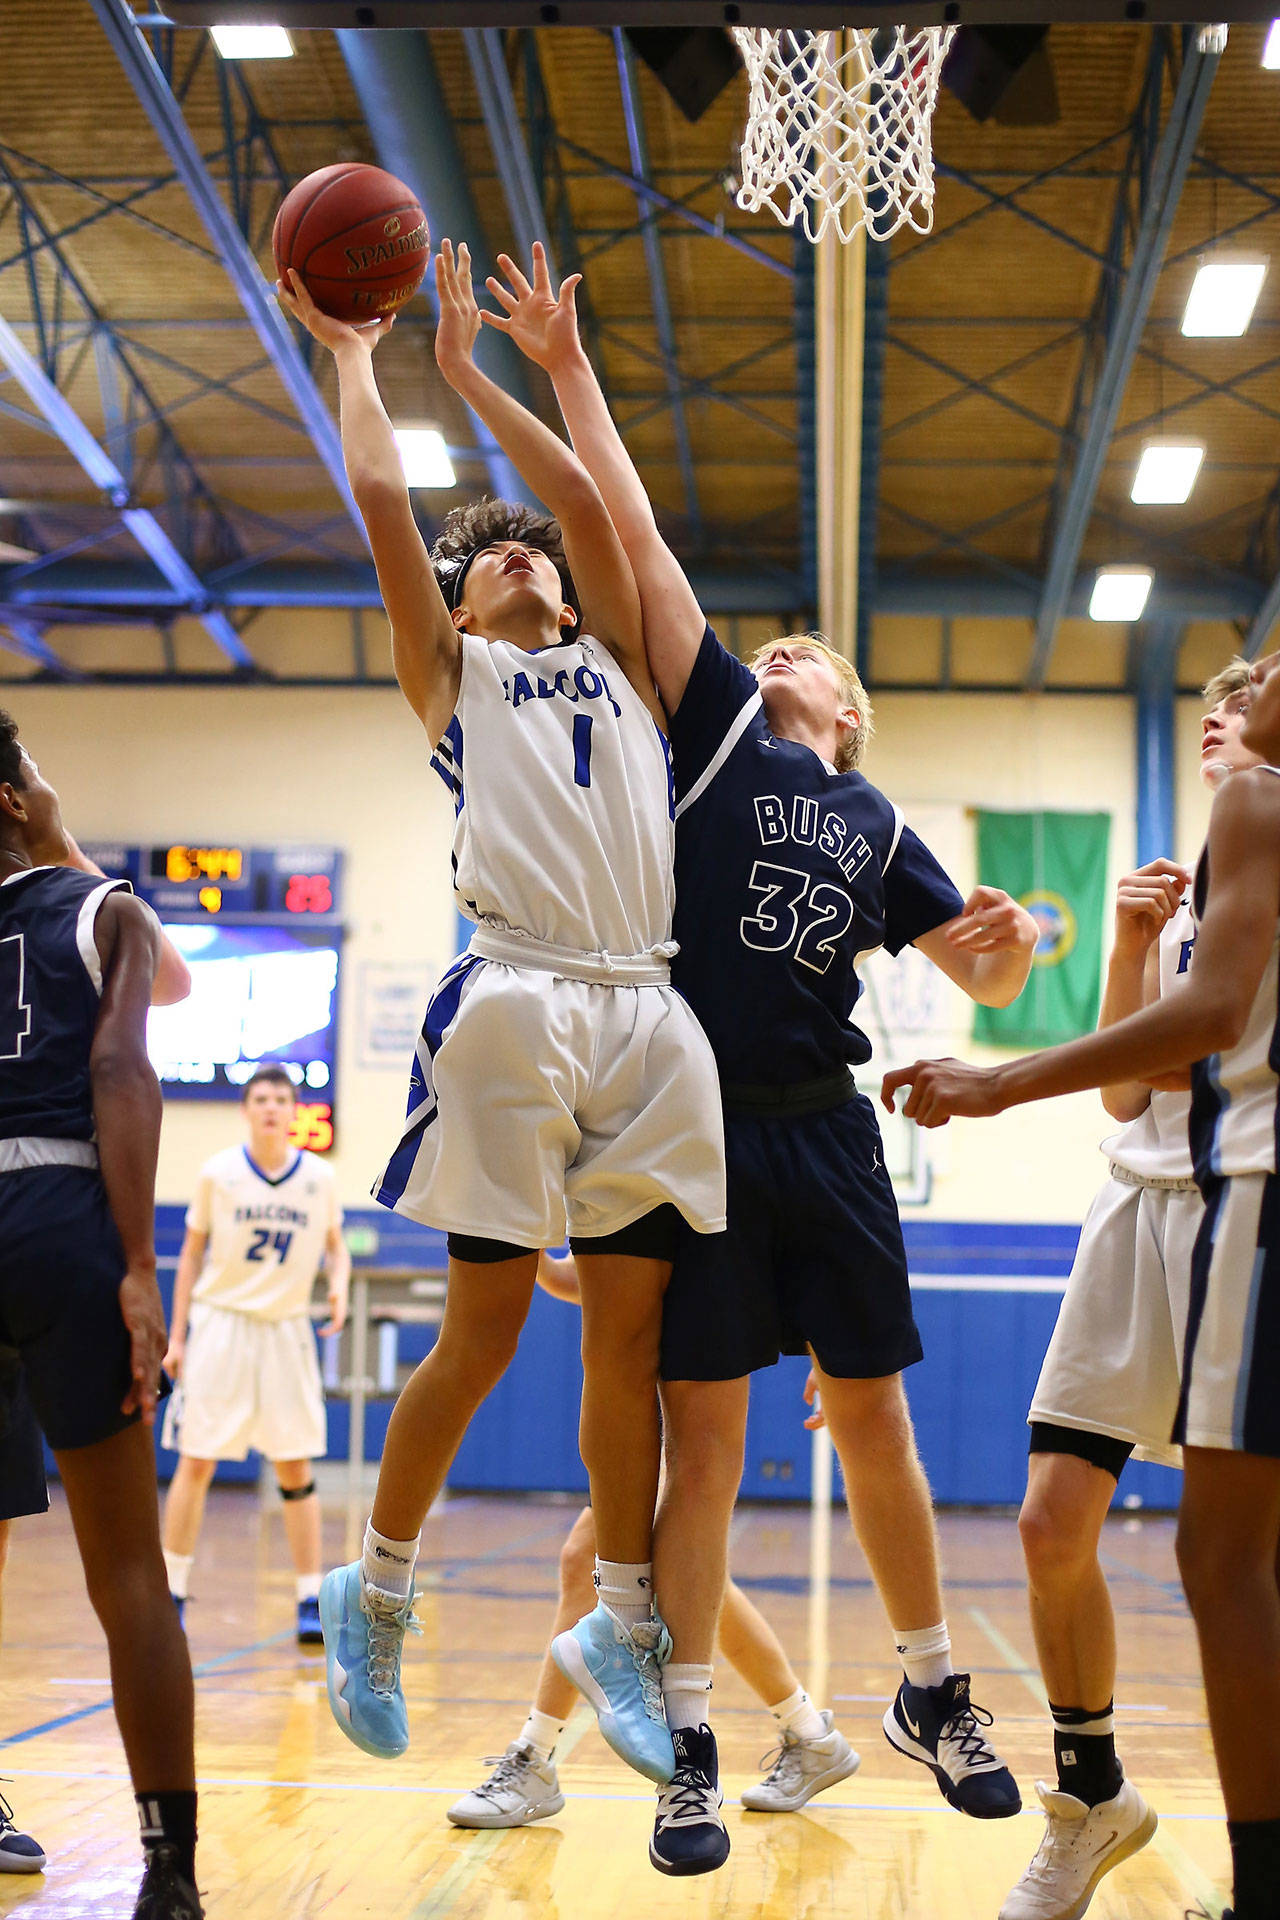 Jacob Ng (1) powers to the hoop for the Falcons.(Photo by John Fisken)